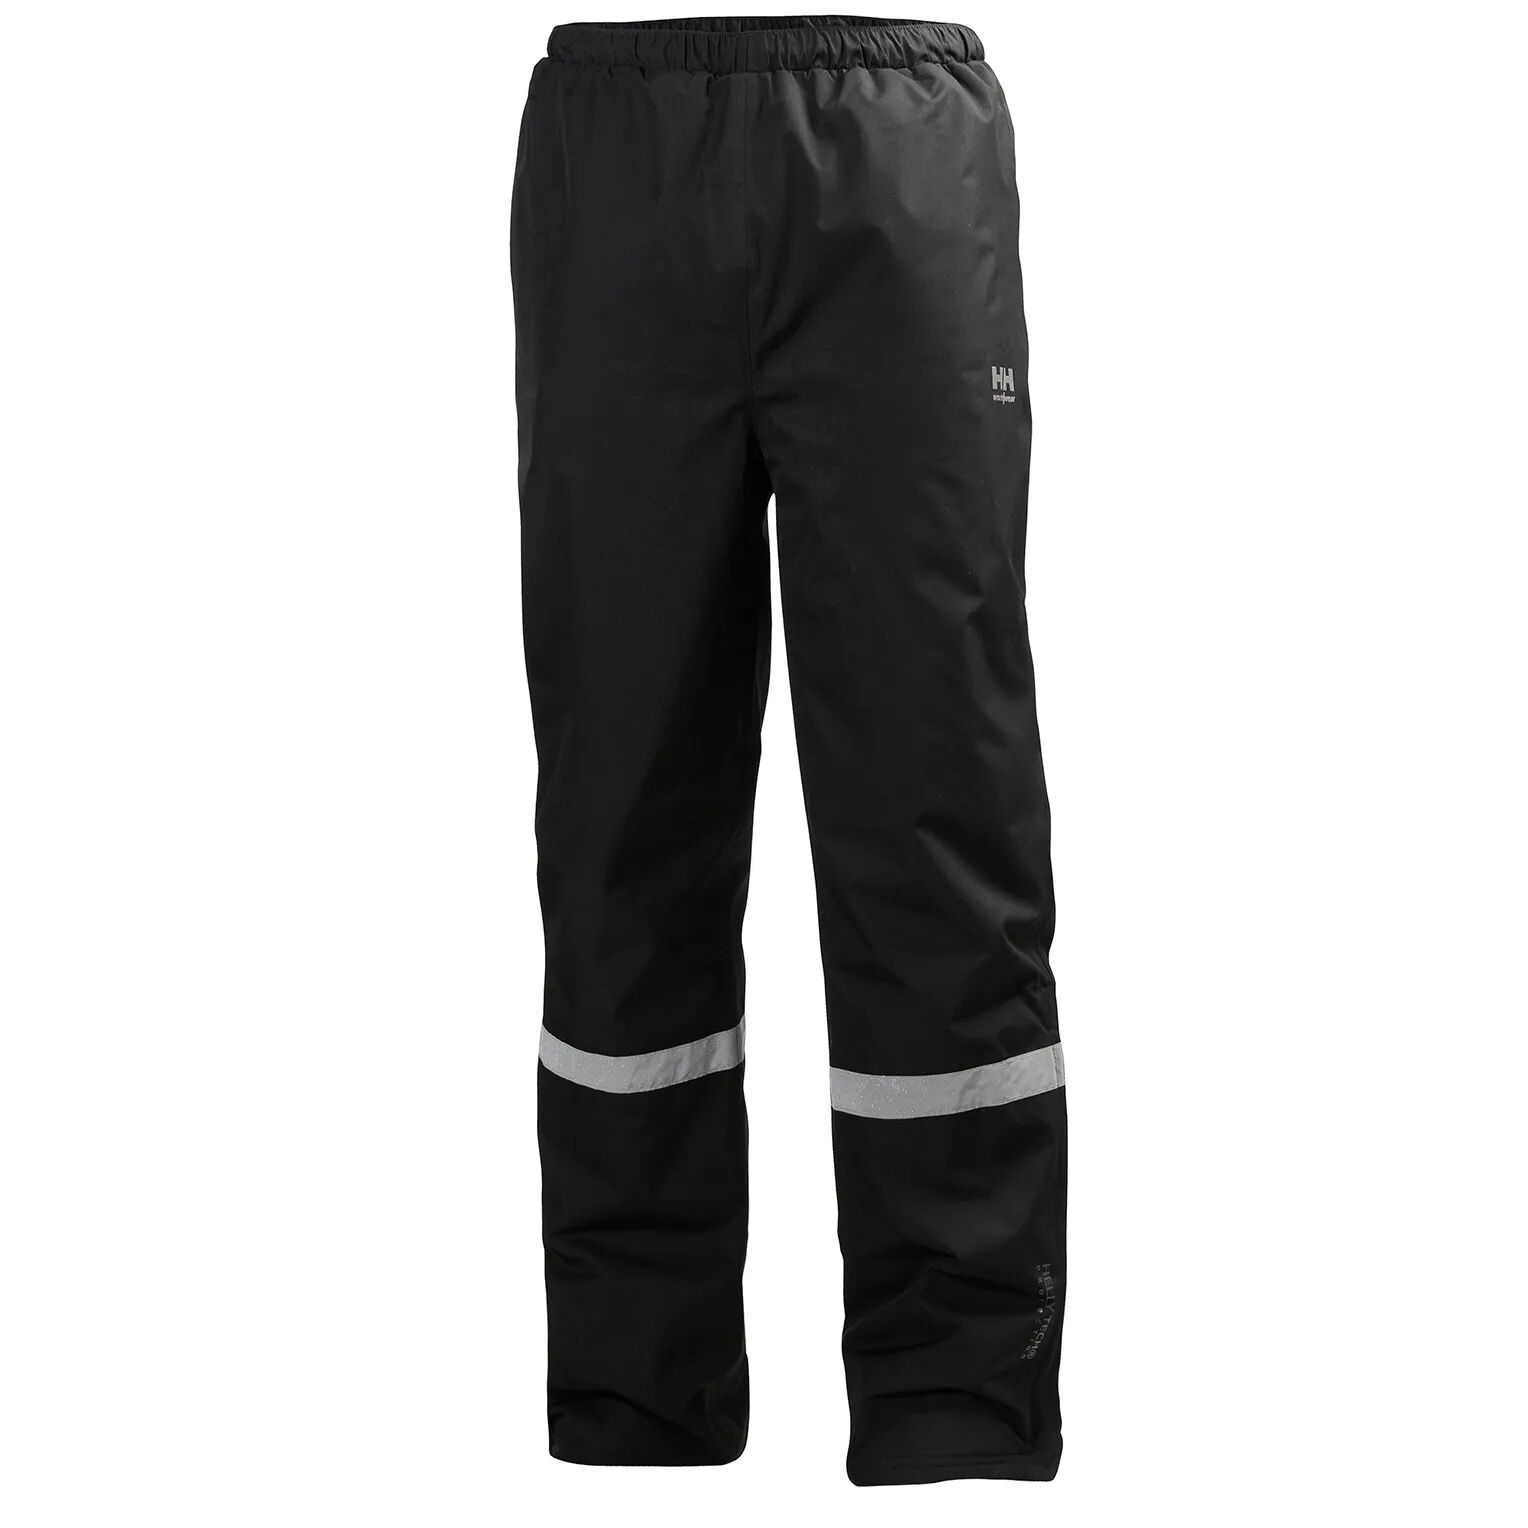 HH Workwear Helly Hansen WorkwearManchester Primaloft Insulated Protective Winter Pants Black S